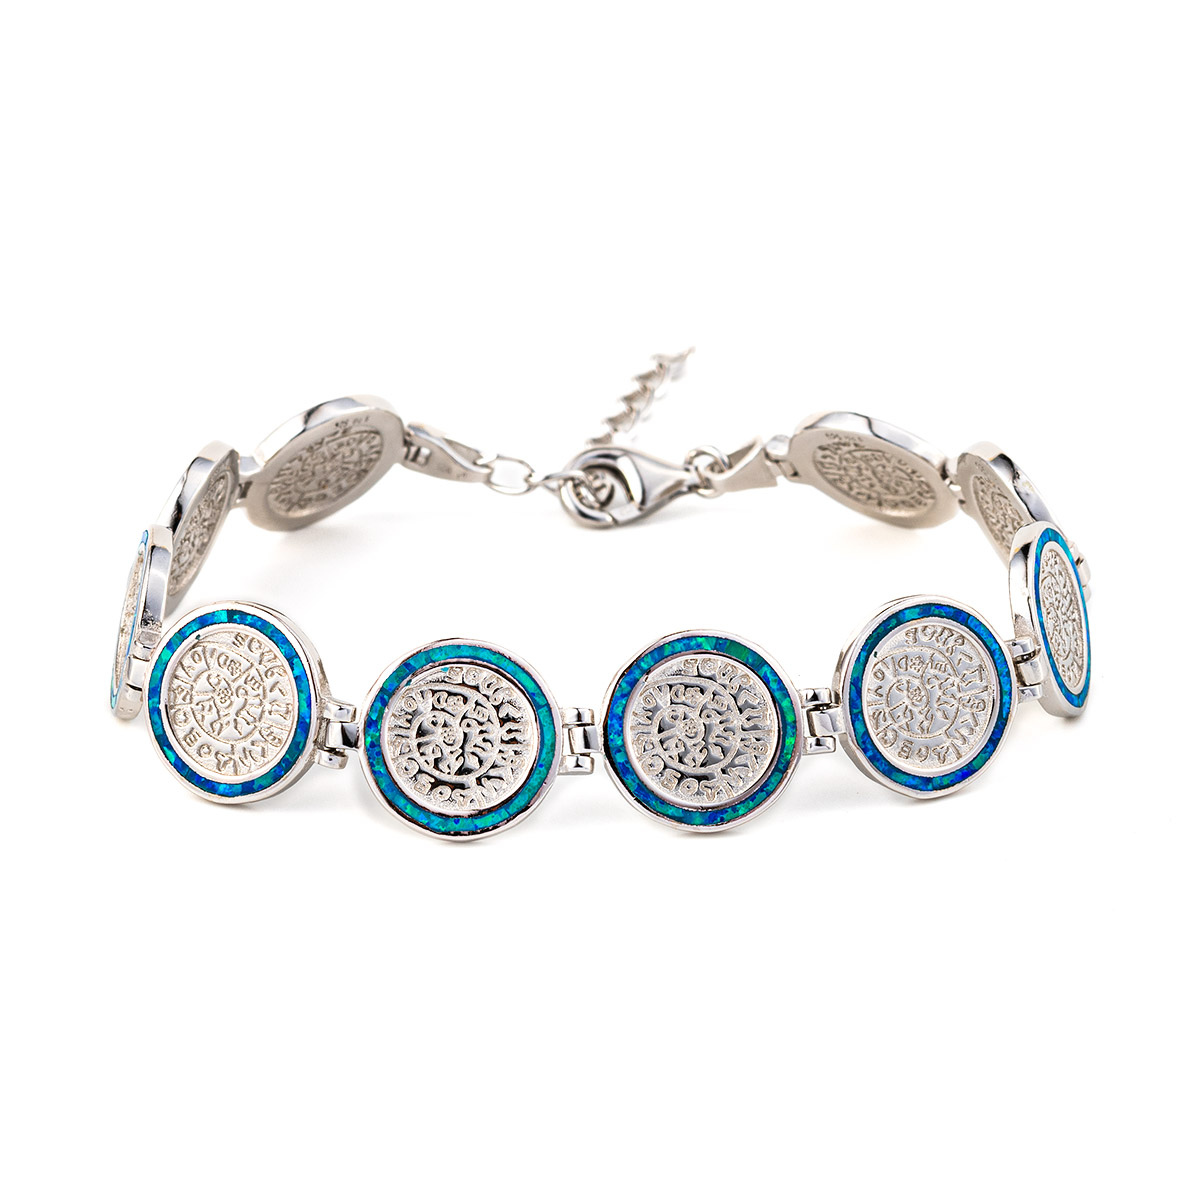 Phaistos Disc Link Bracelet - 925 Sterling Silver with Blue Opal